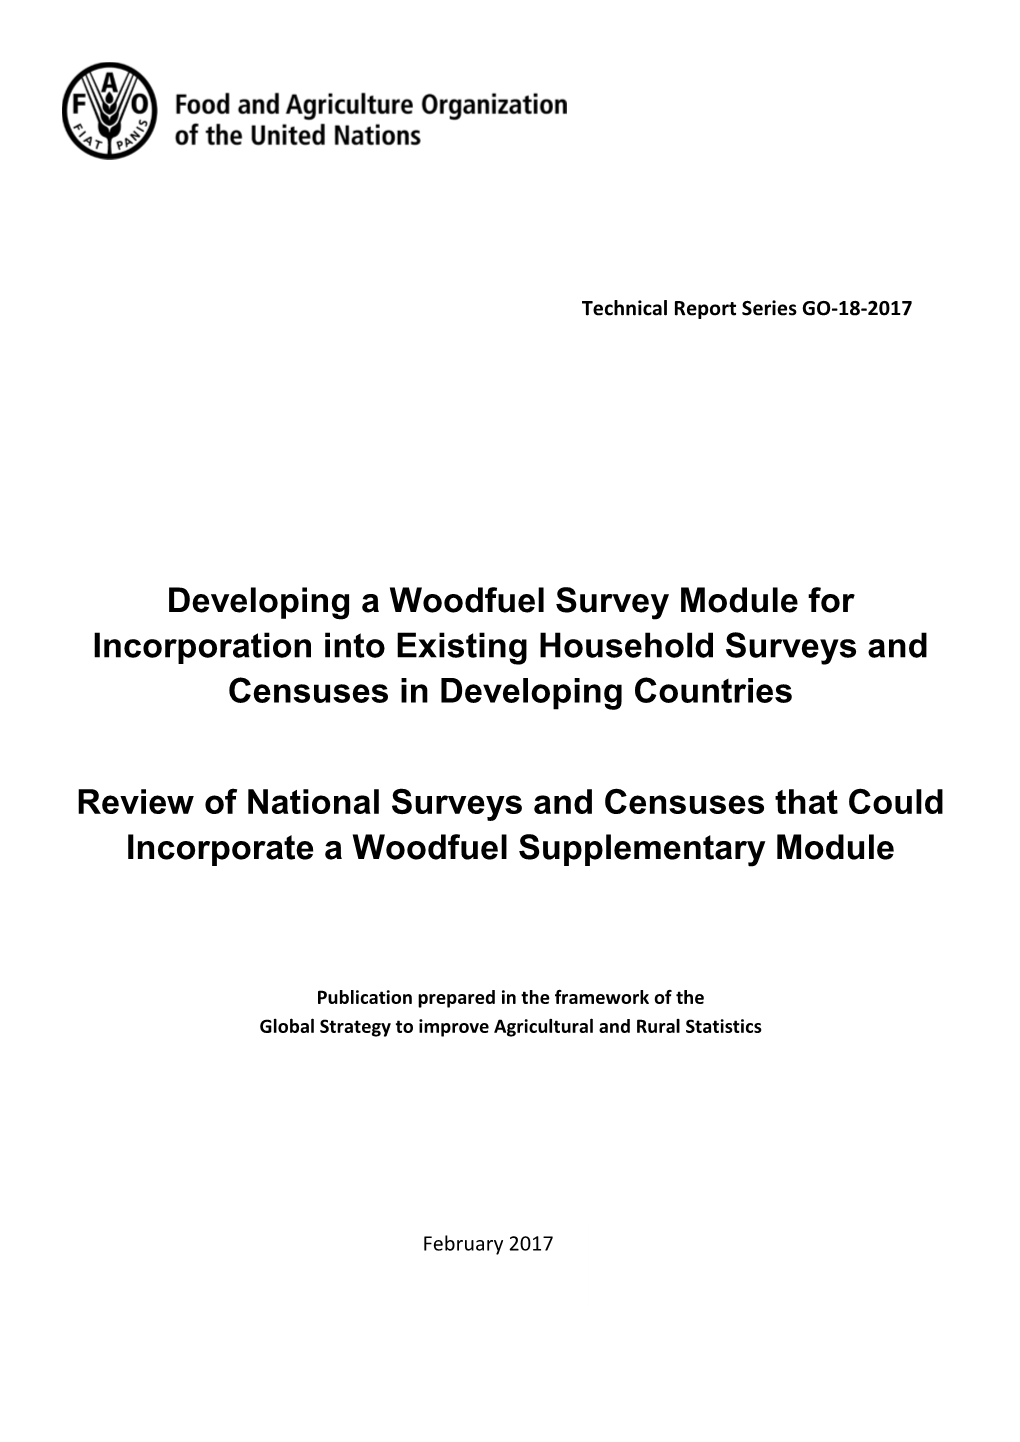 Developing a Woodfuel Survey Module for Incorporation Into Existing Household Surveys and Censuses in Developing Countries